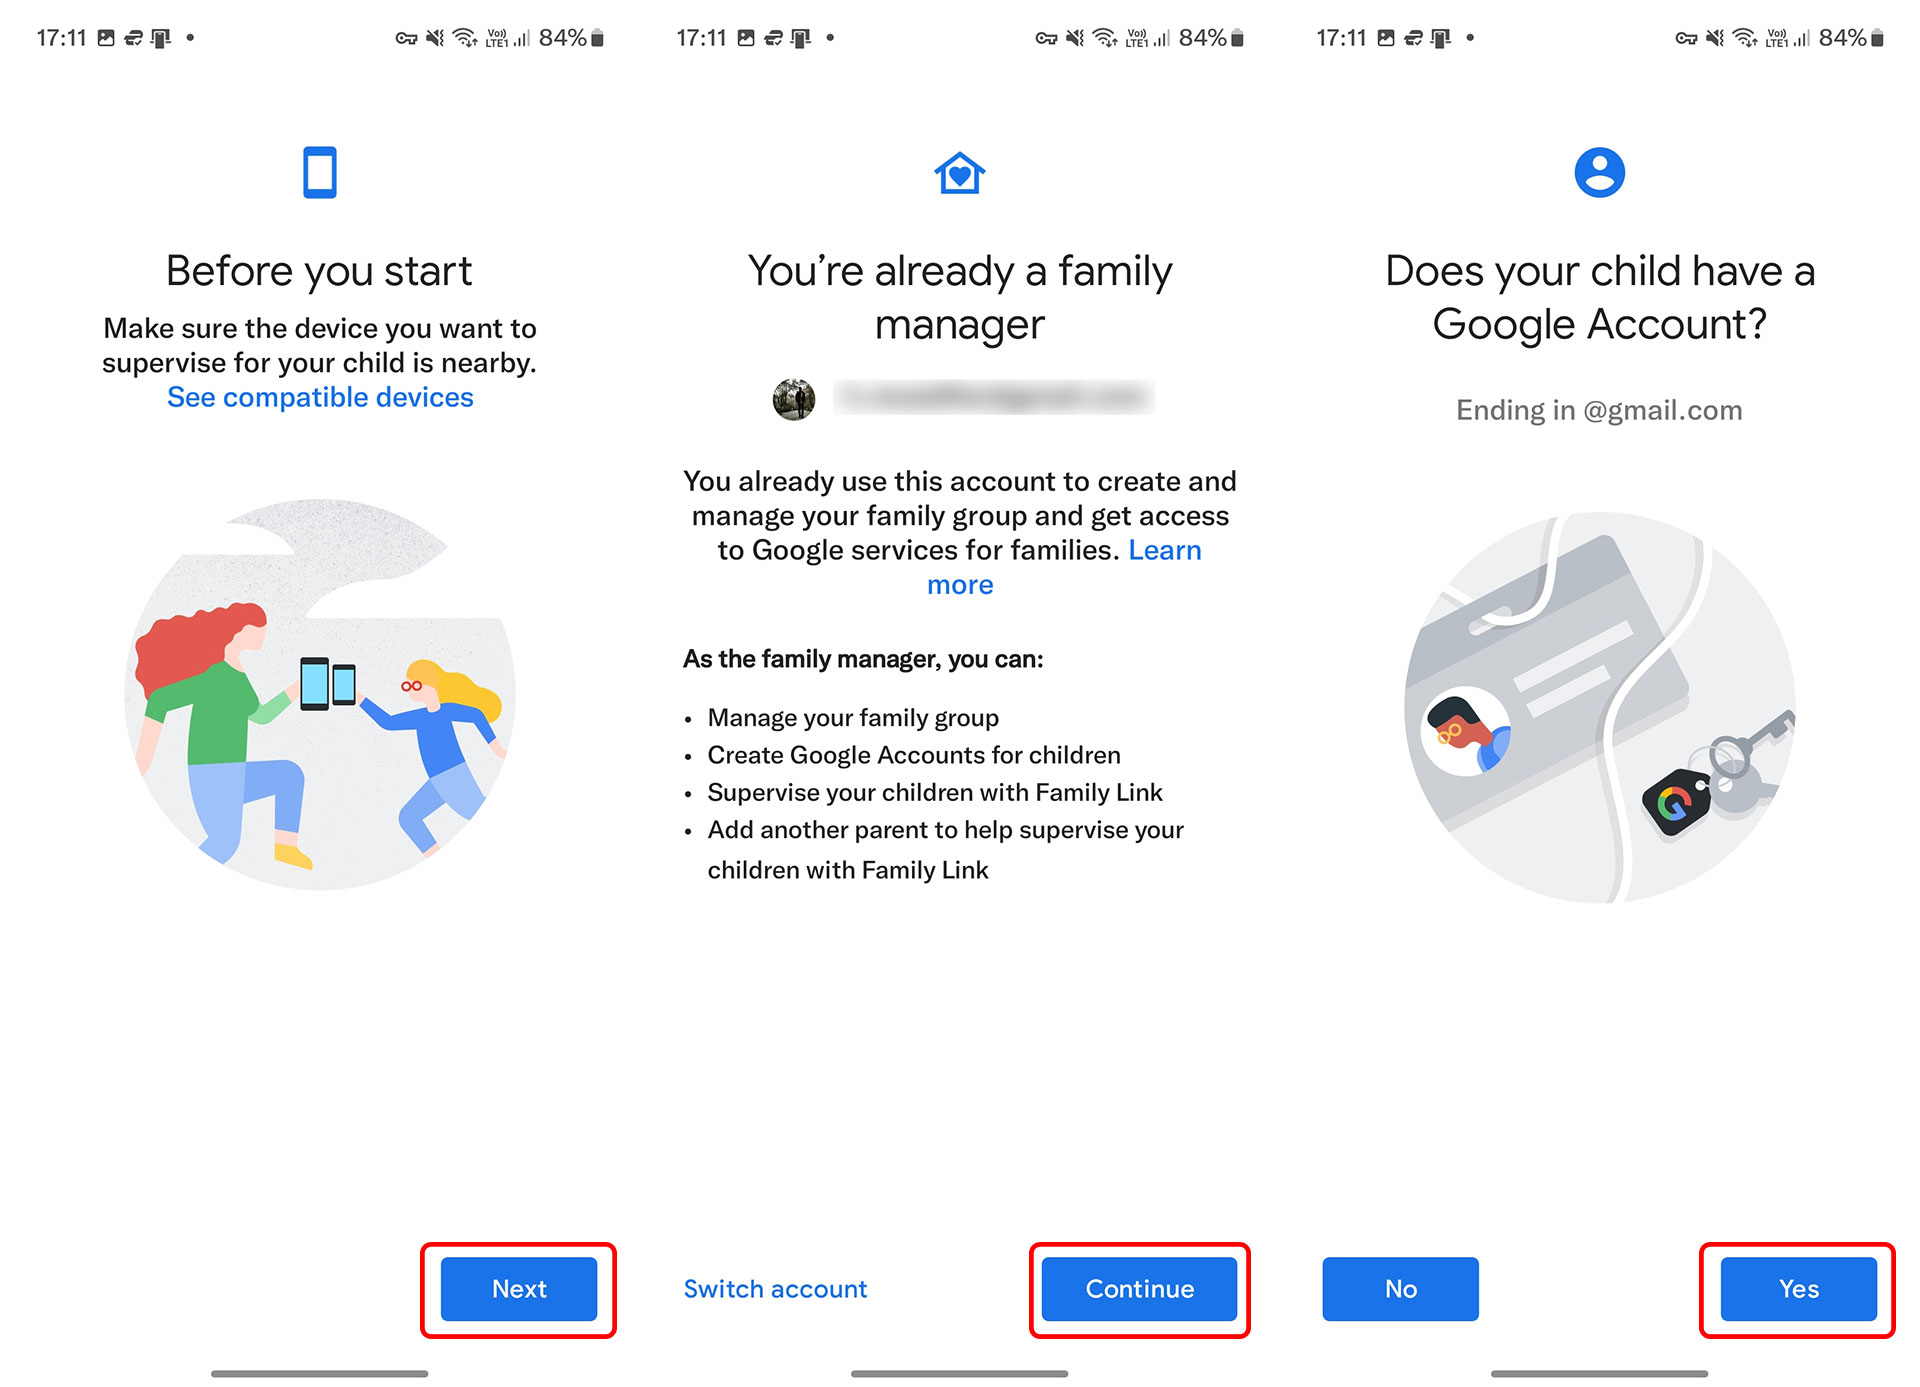 Launch the Google Family Link app on the parent's phone